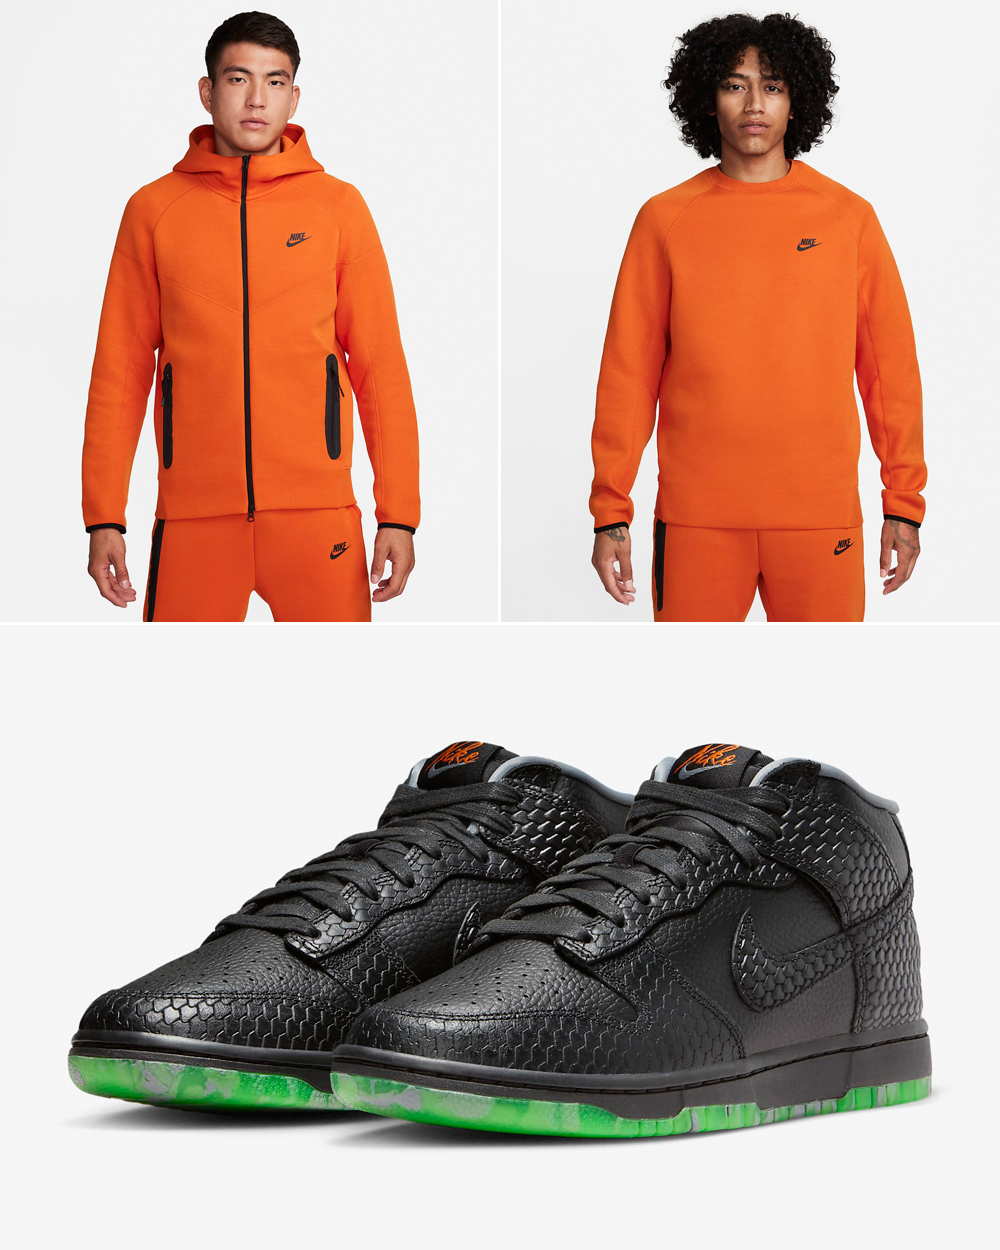 Nike-Dunk-Mid-Halloween-Outfits